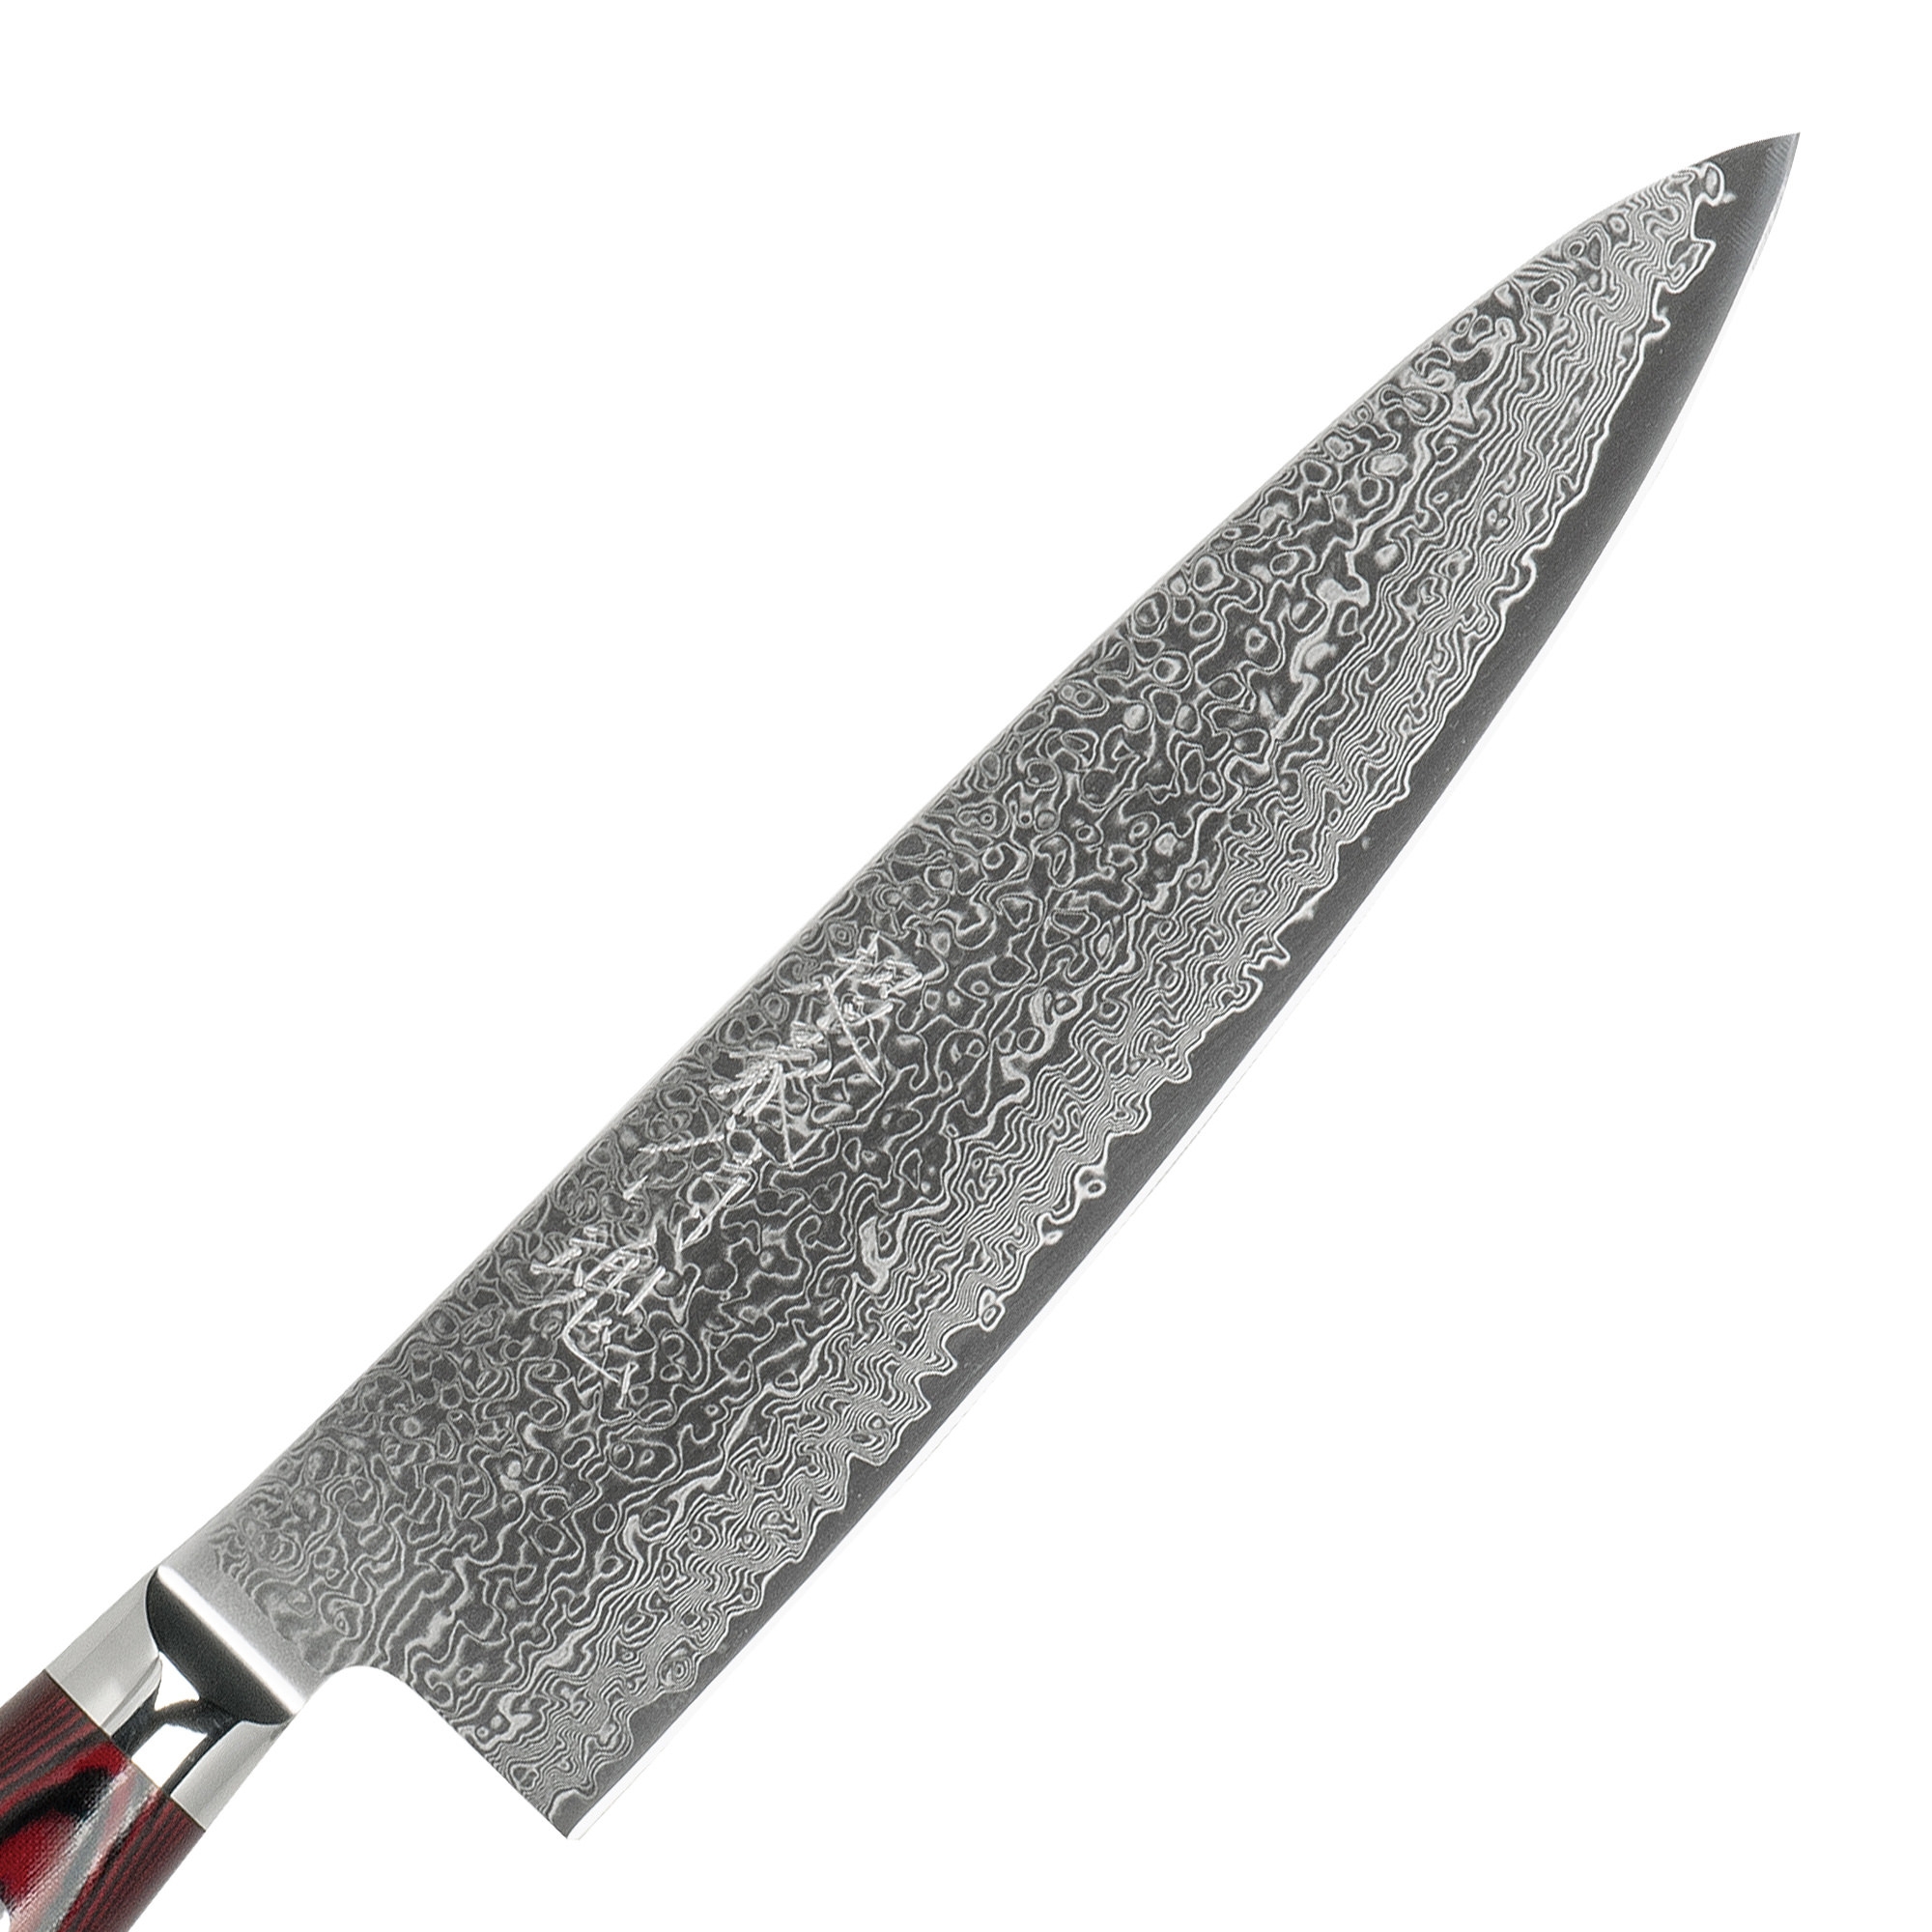 Yaxell Super Gou Chef's Knife 20cm Image 2